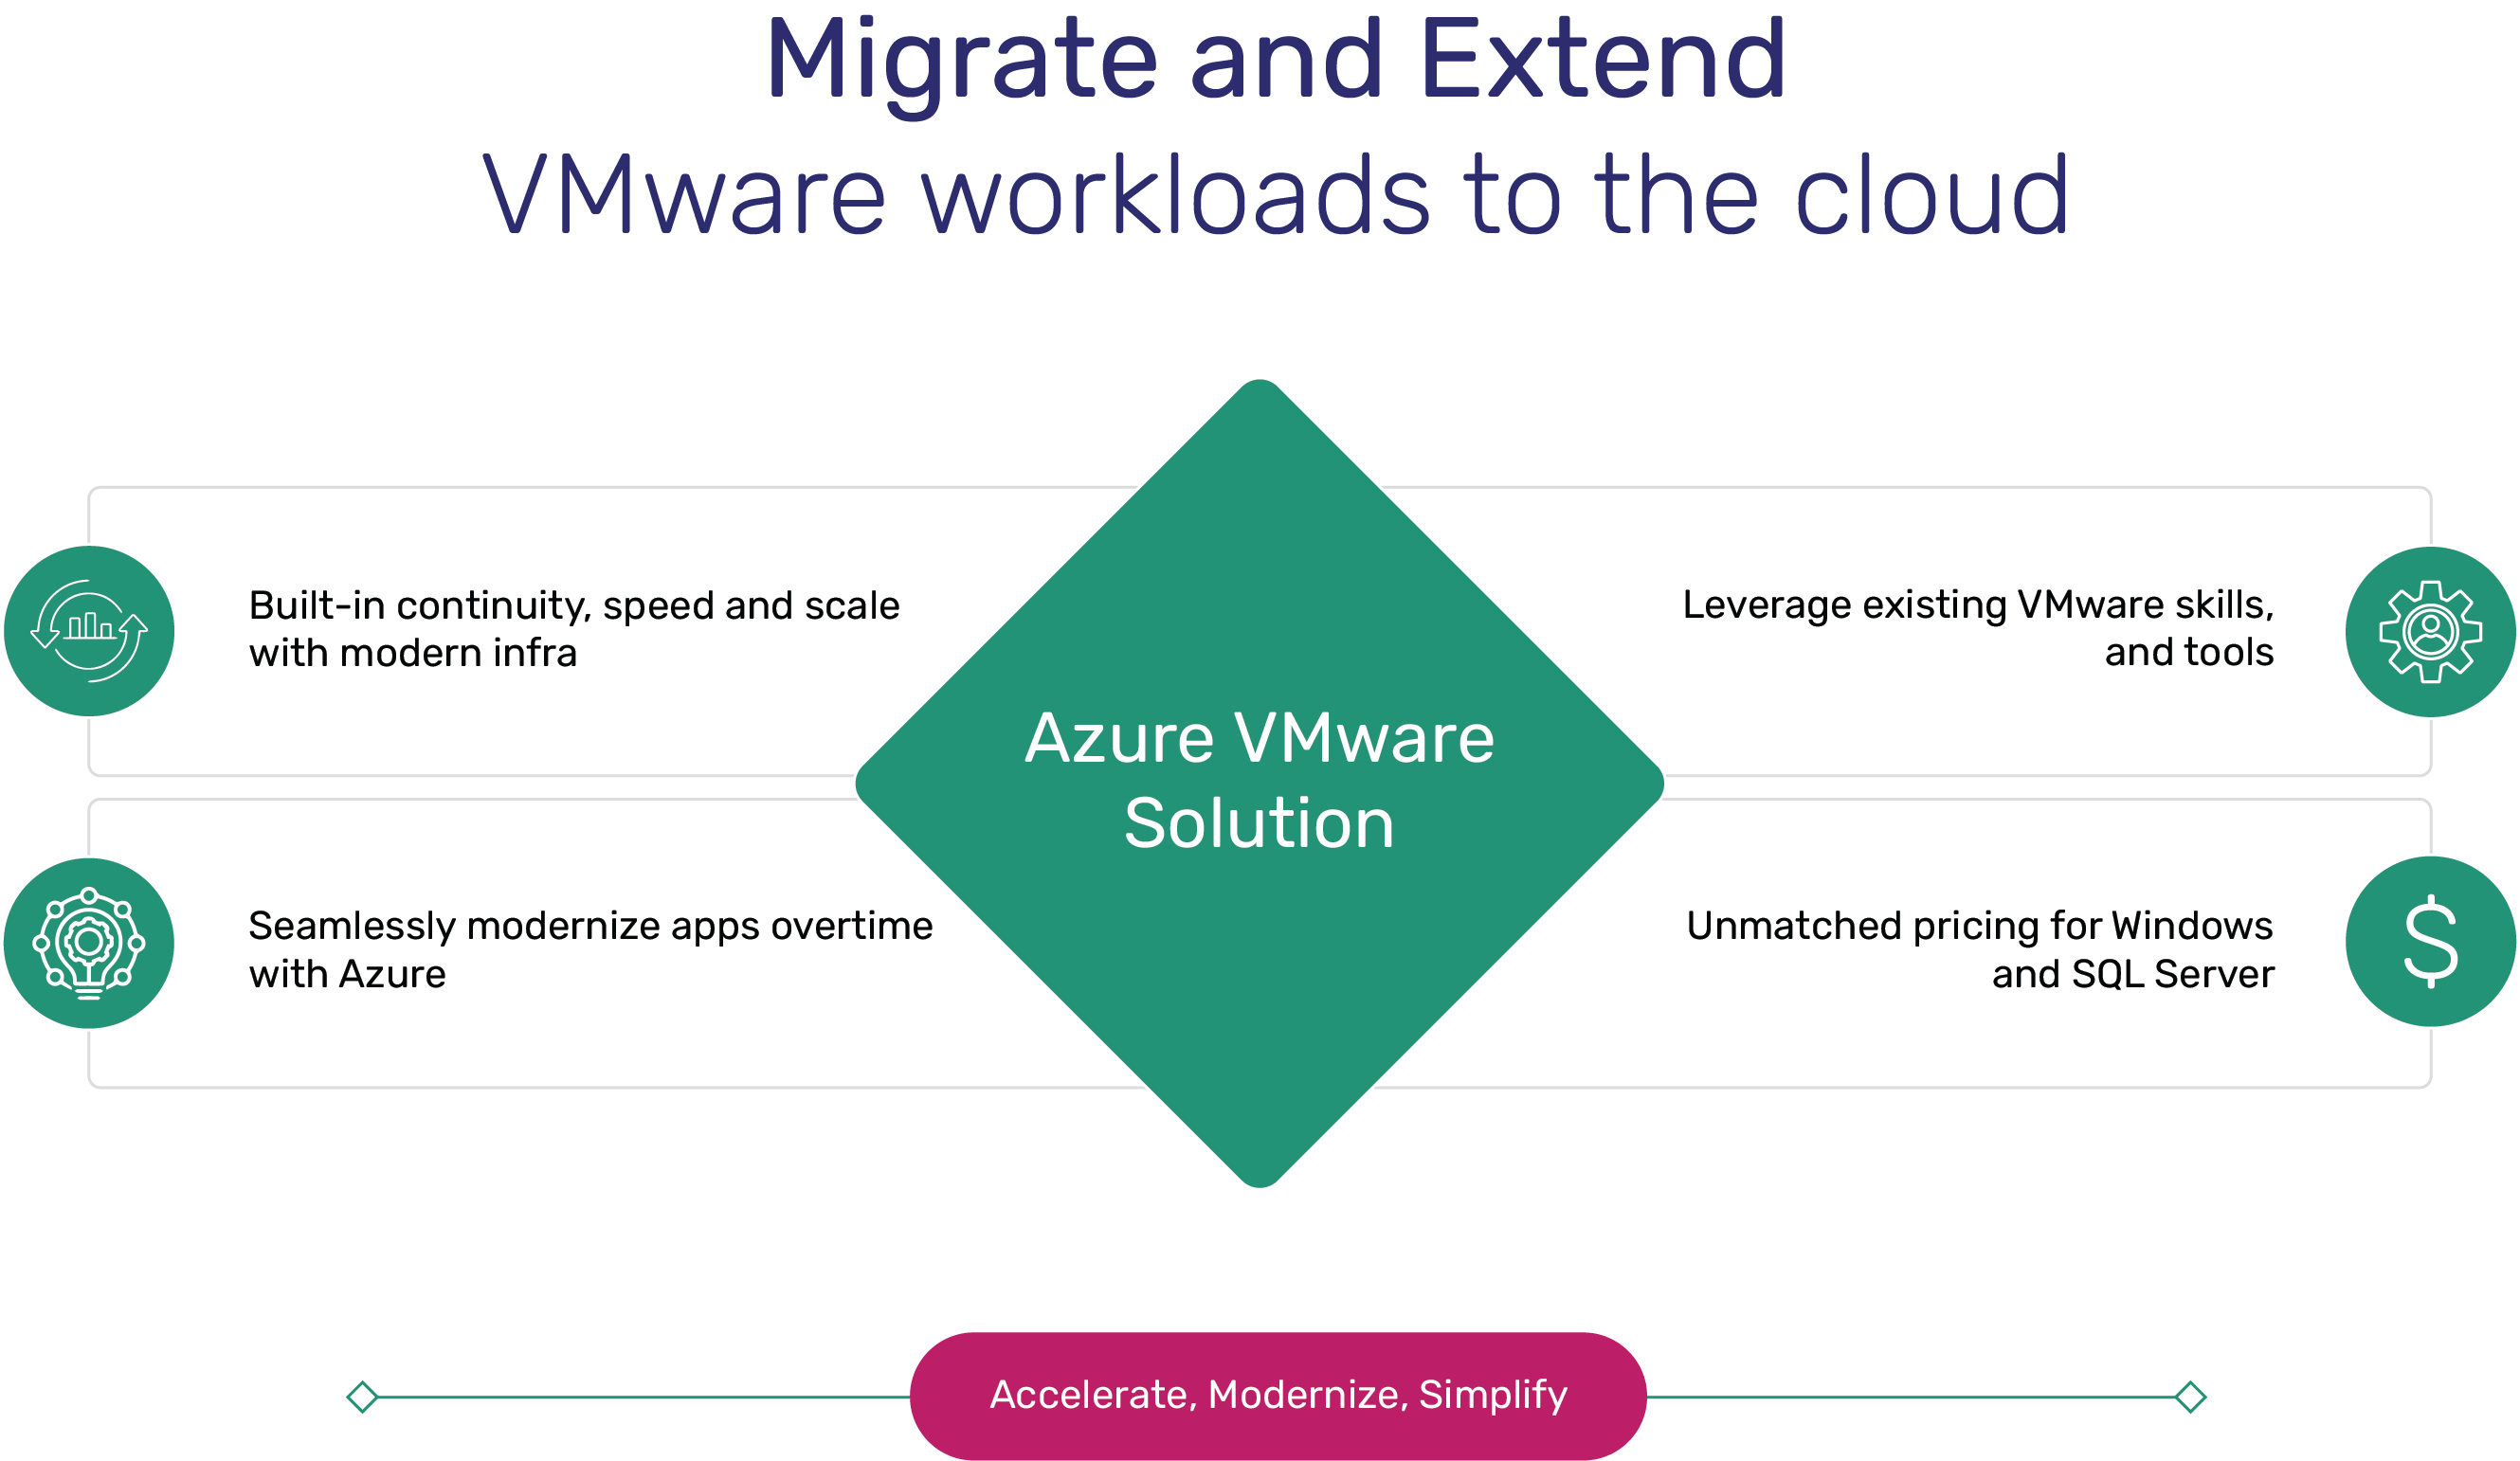 VMware workload to the cloud